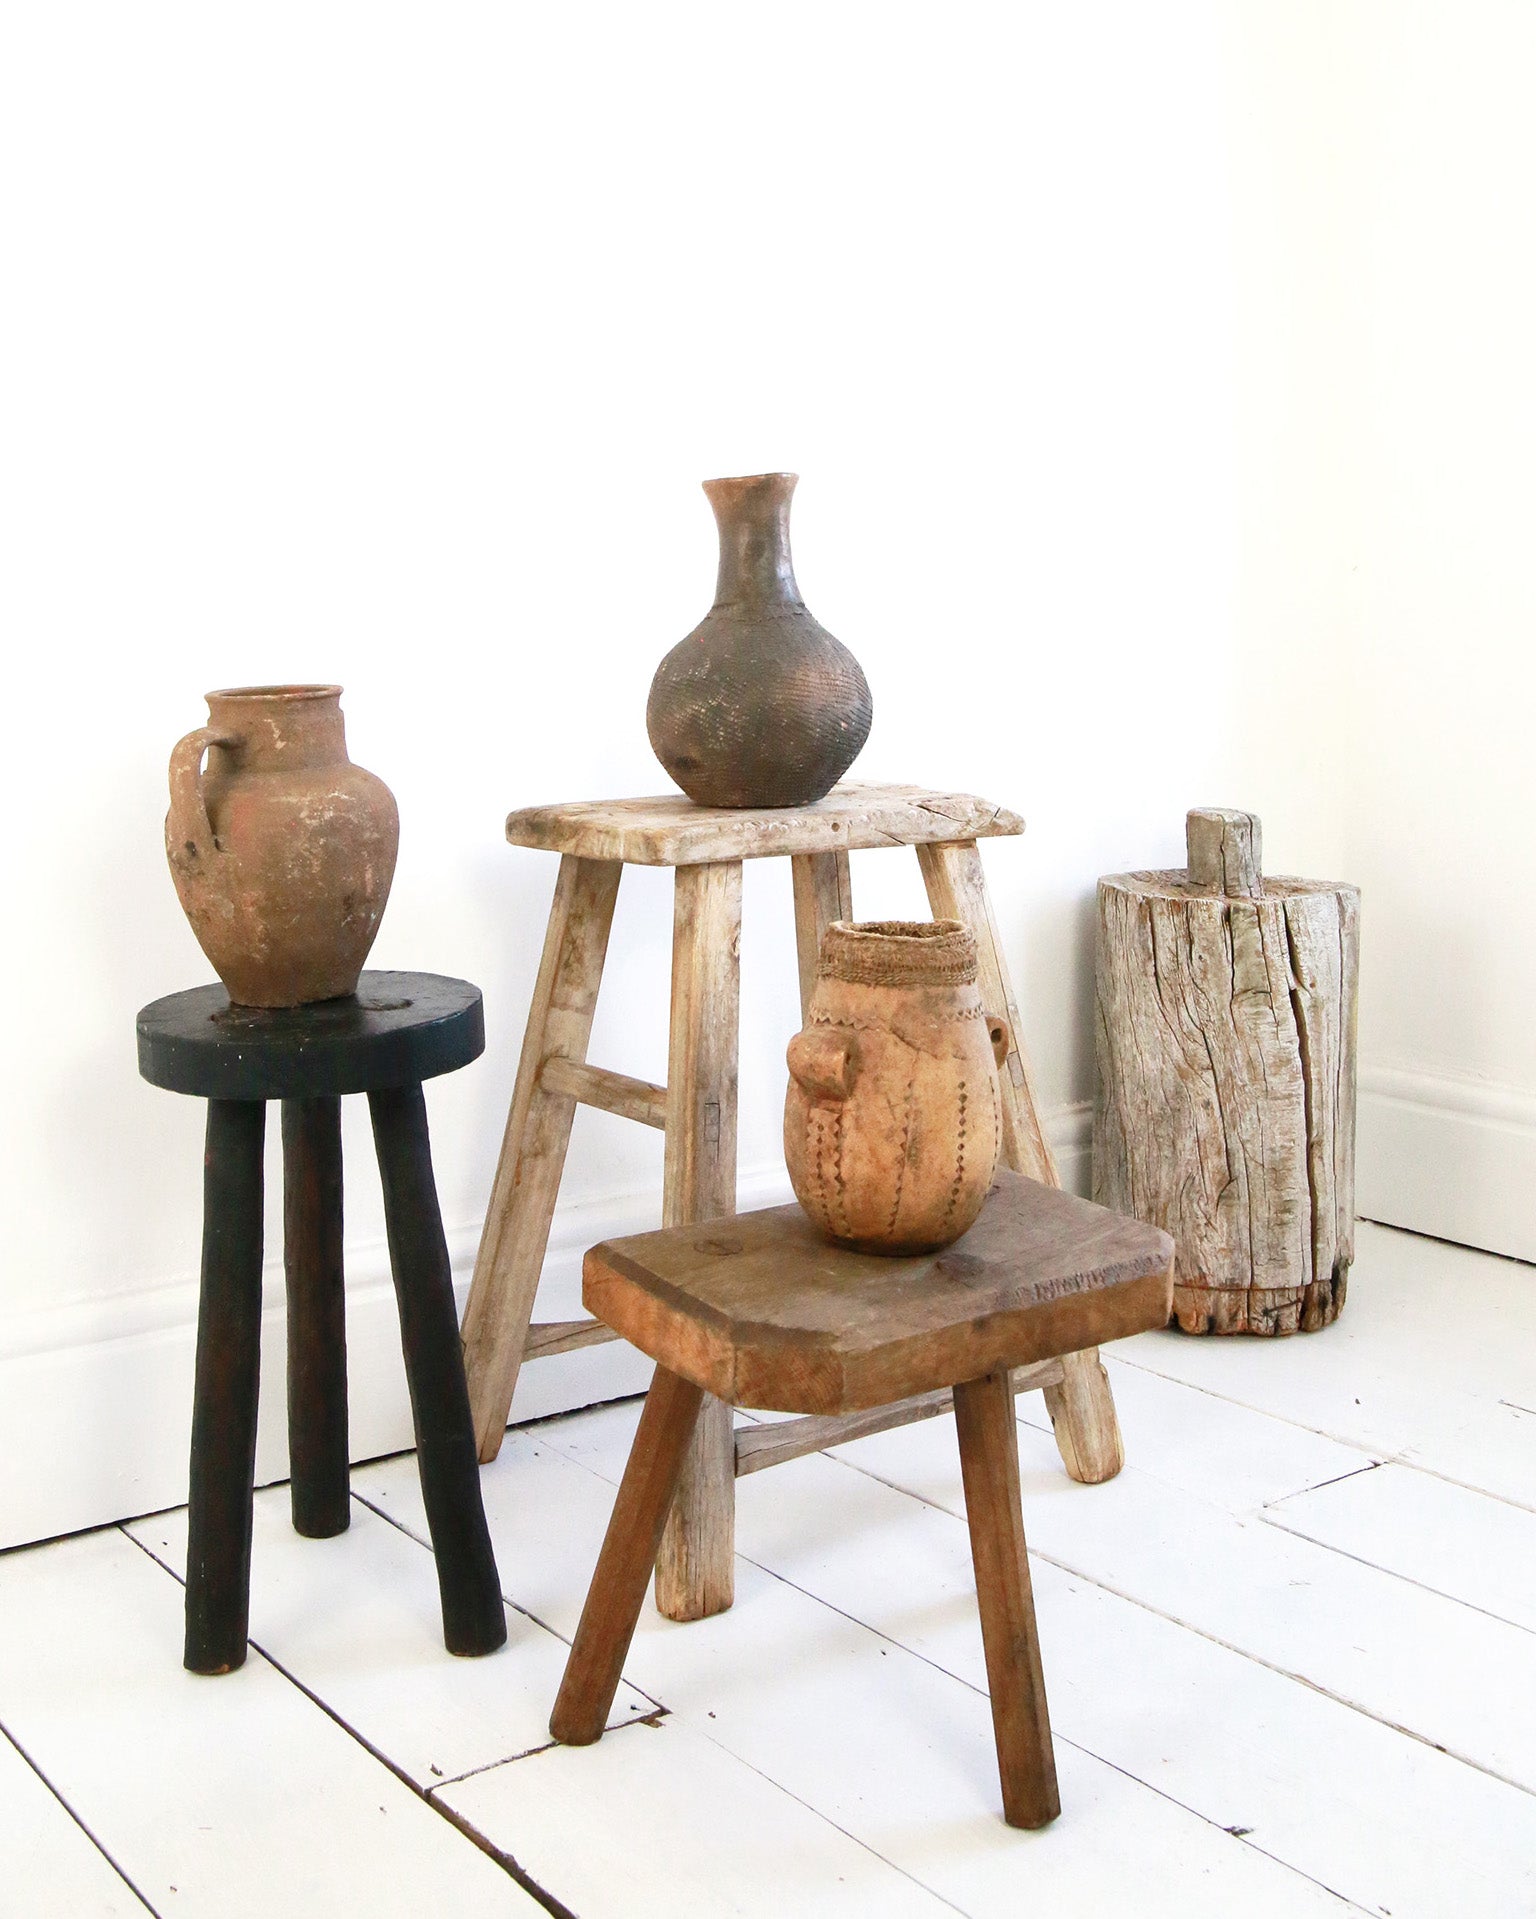 Display of Antique stools and vases